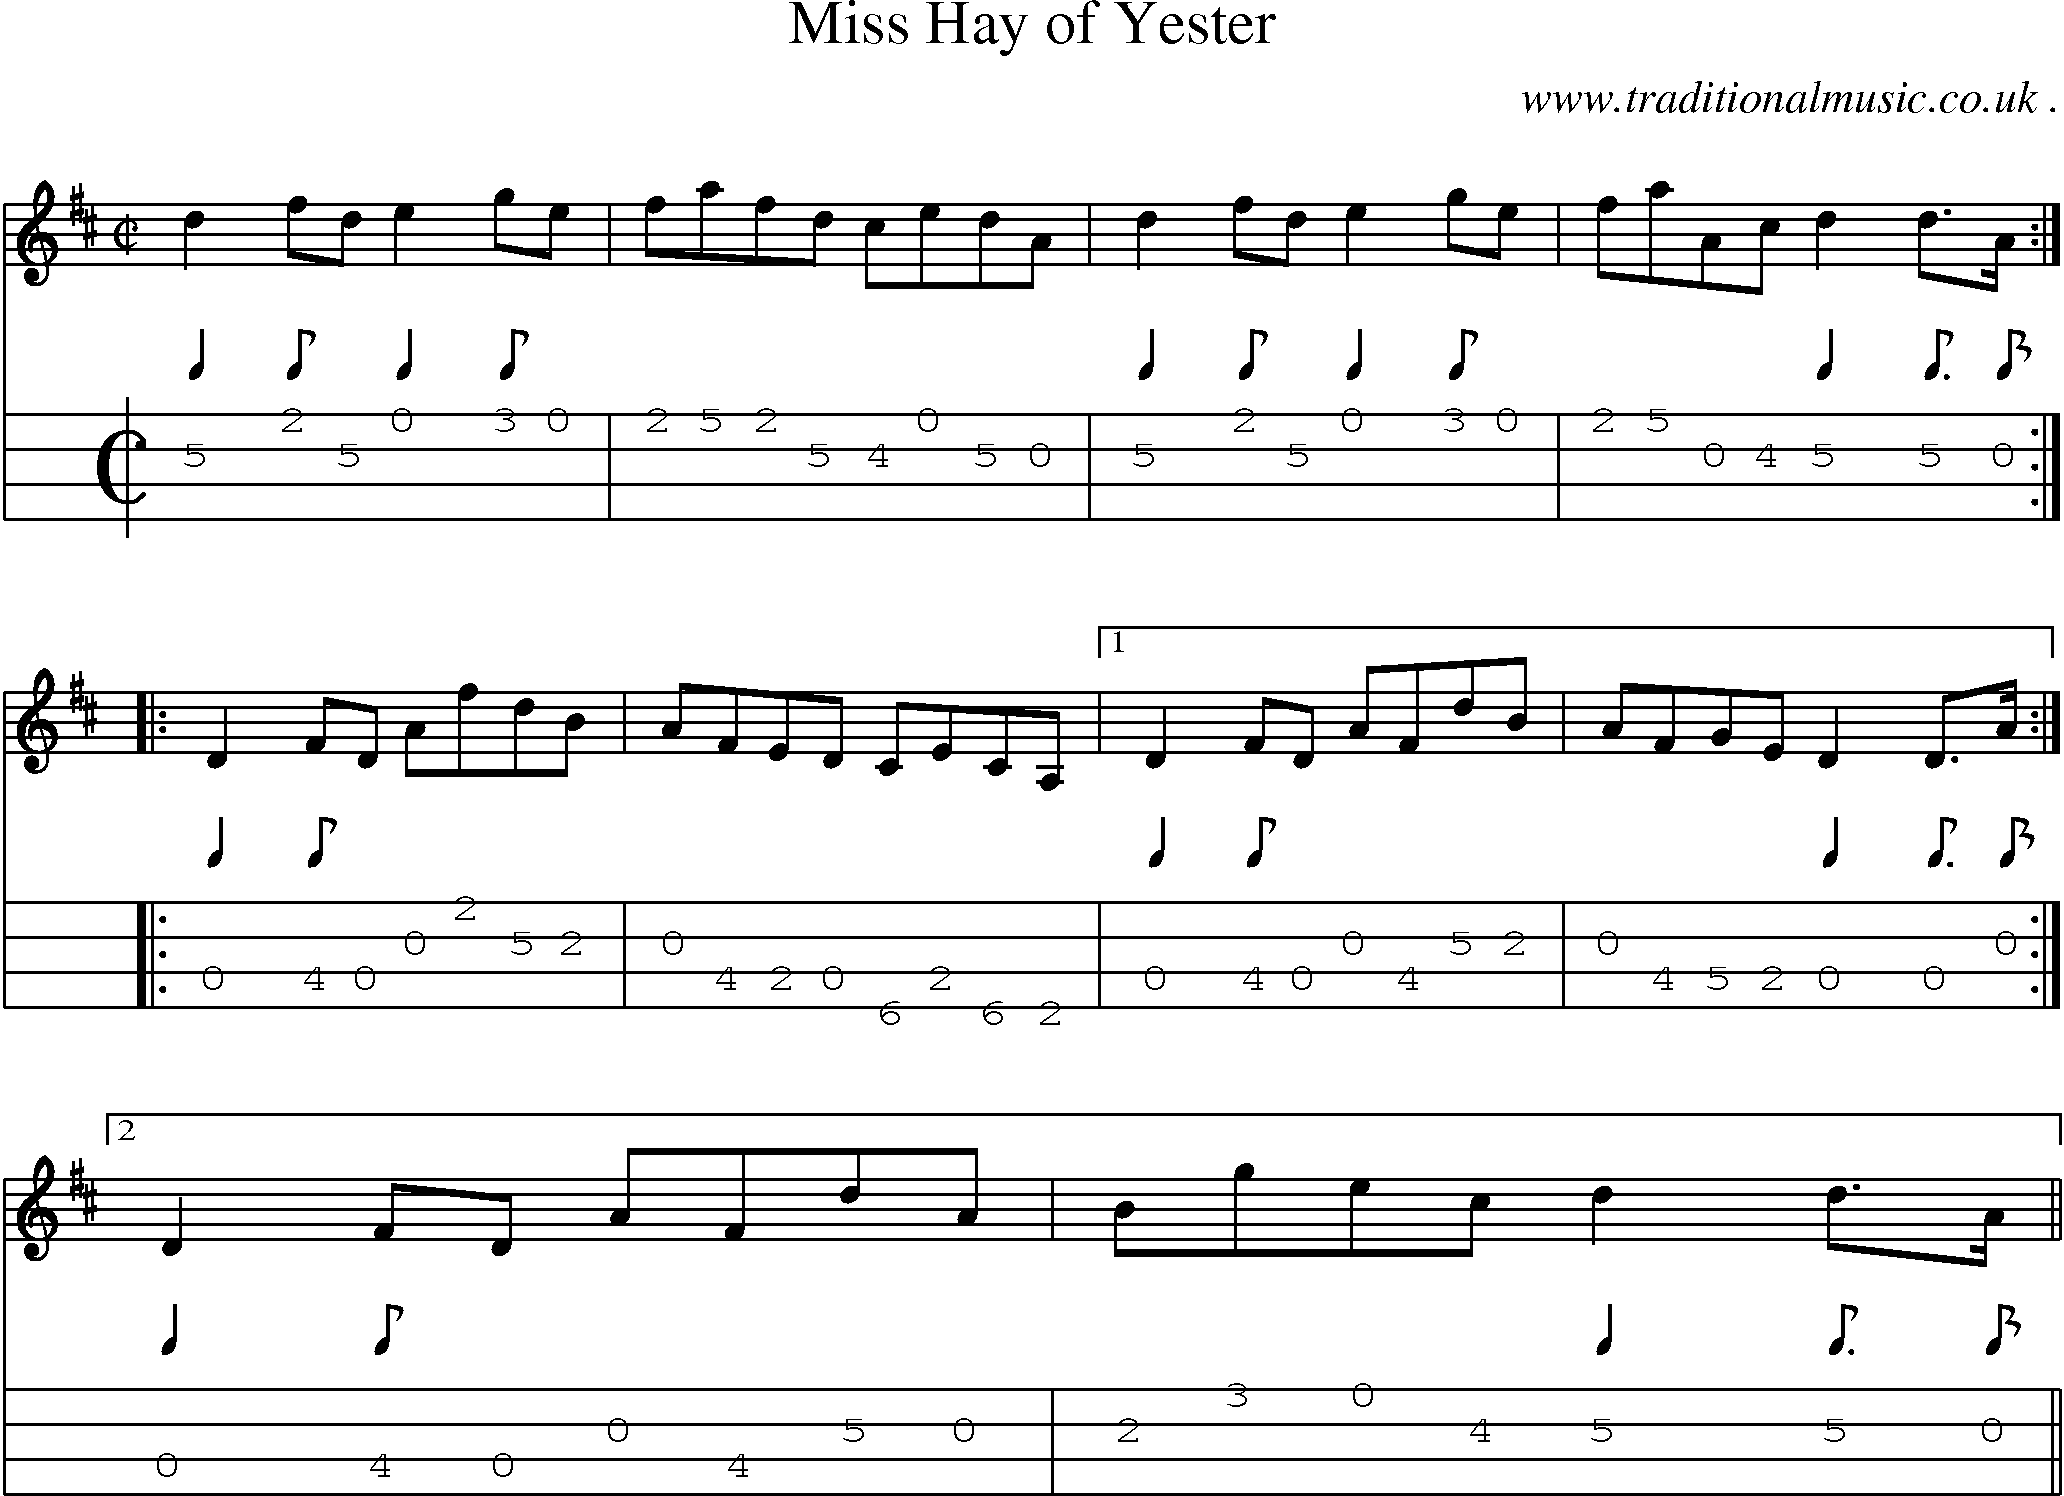 Sheet-music  score, Chords and Mandolin Tabs for Miss Hay Of Yester